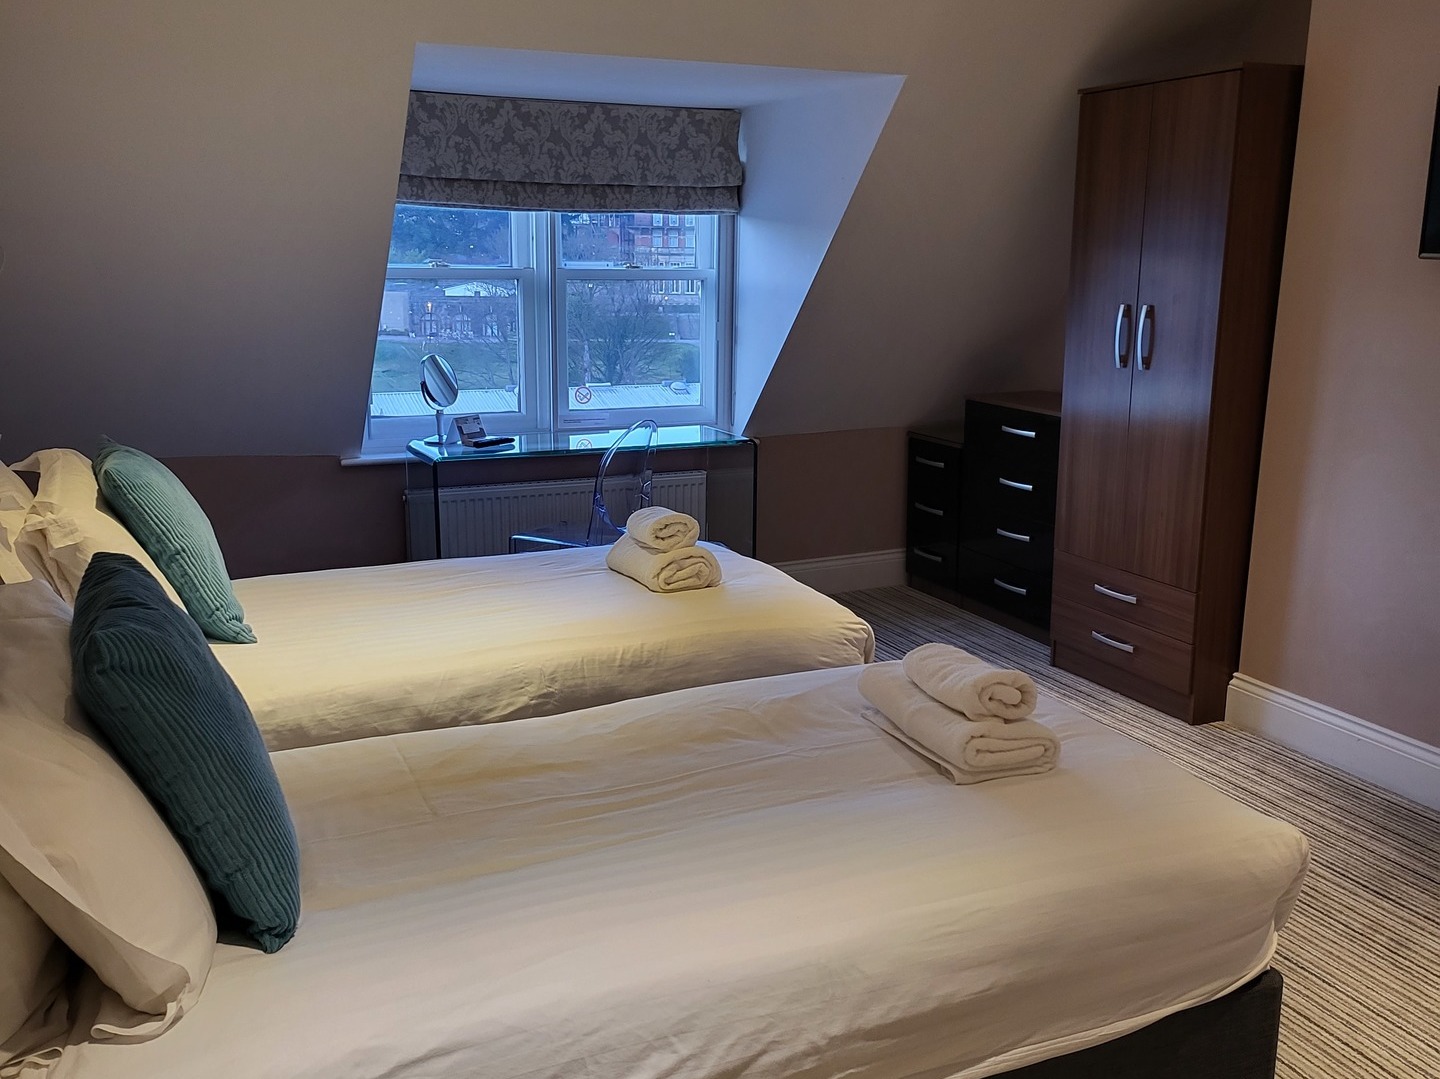 Luxury two bedroom apartments to rent in Harrogate town centre north yorkshire hotel alternative